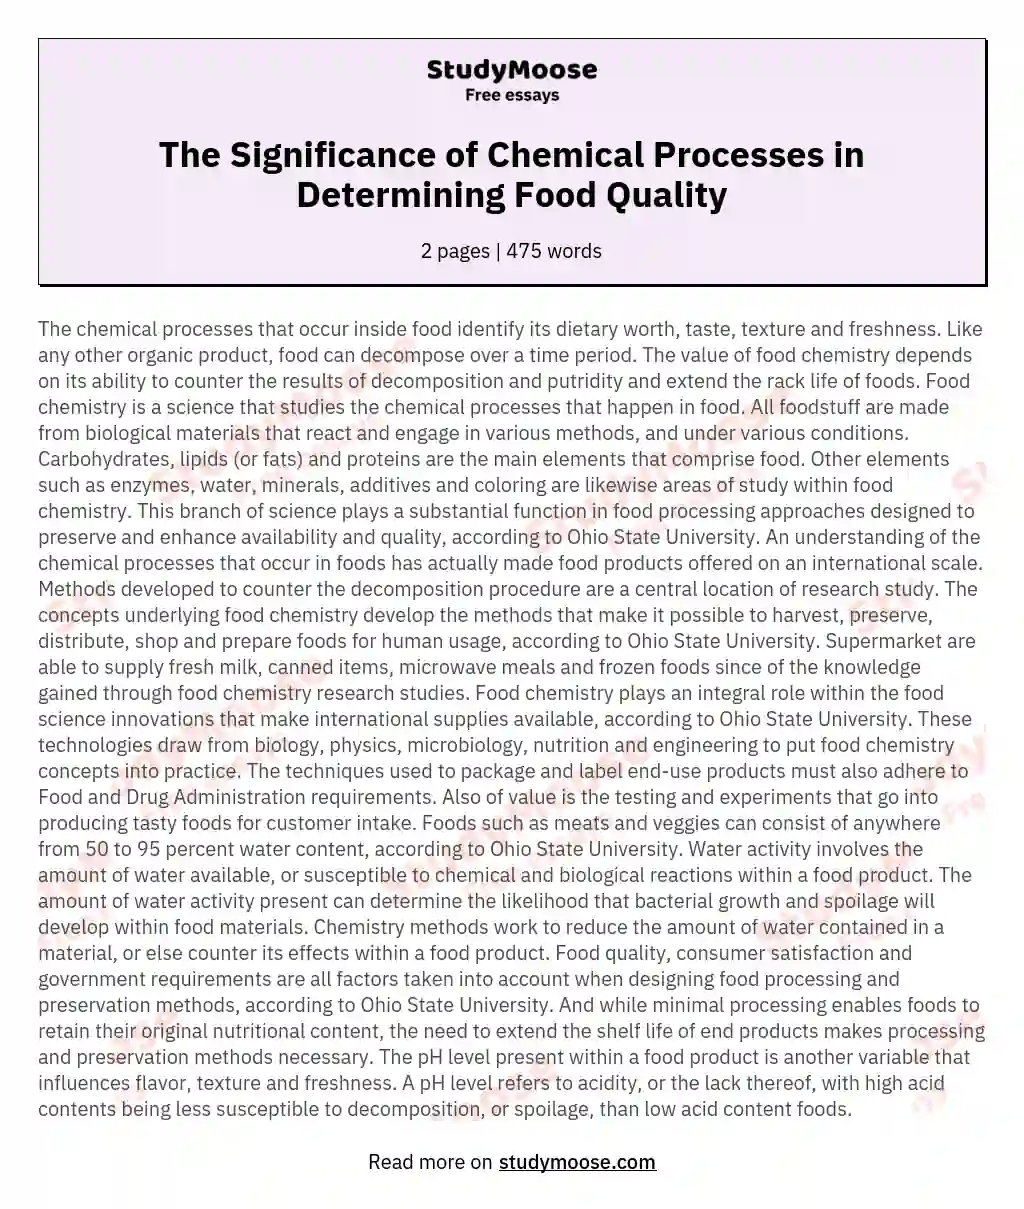 The Significance of Chemical Processes in Determining Food Quality essay